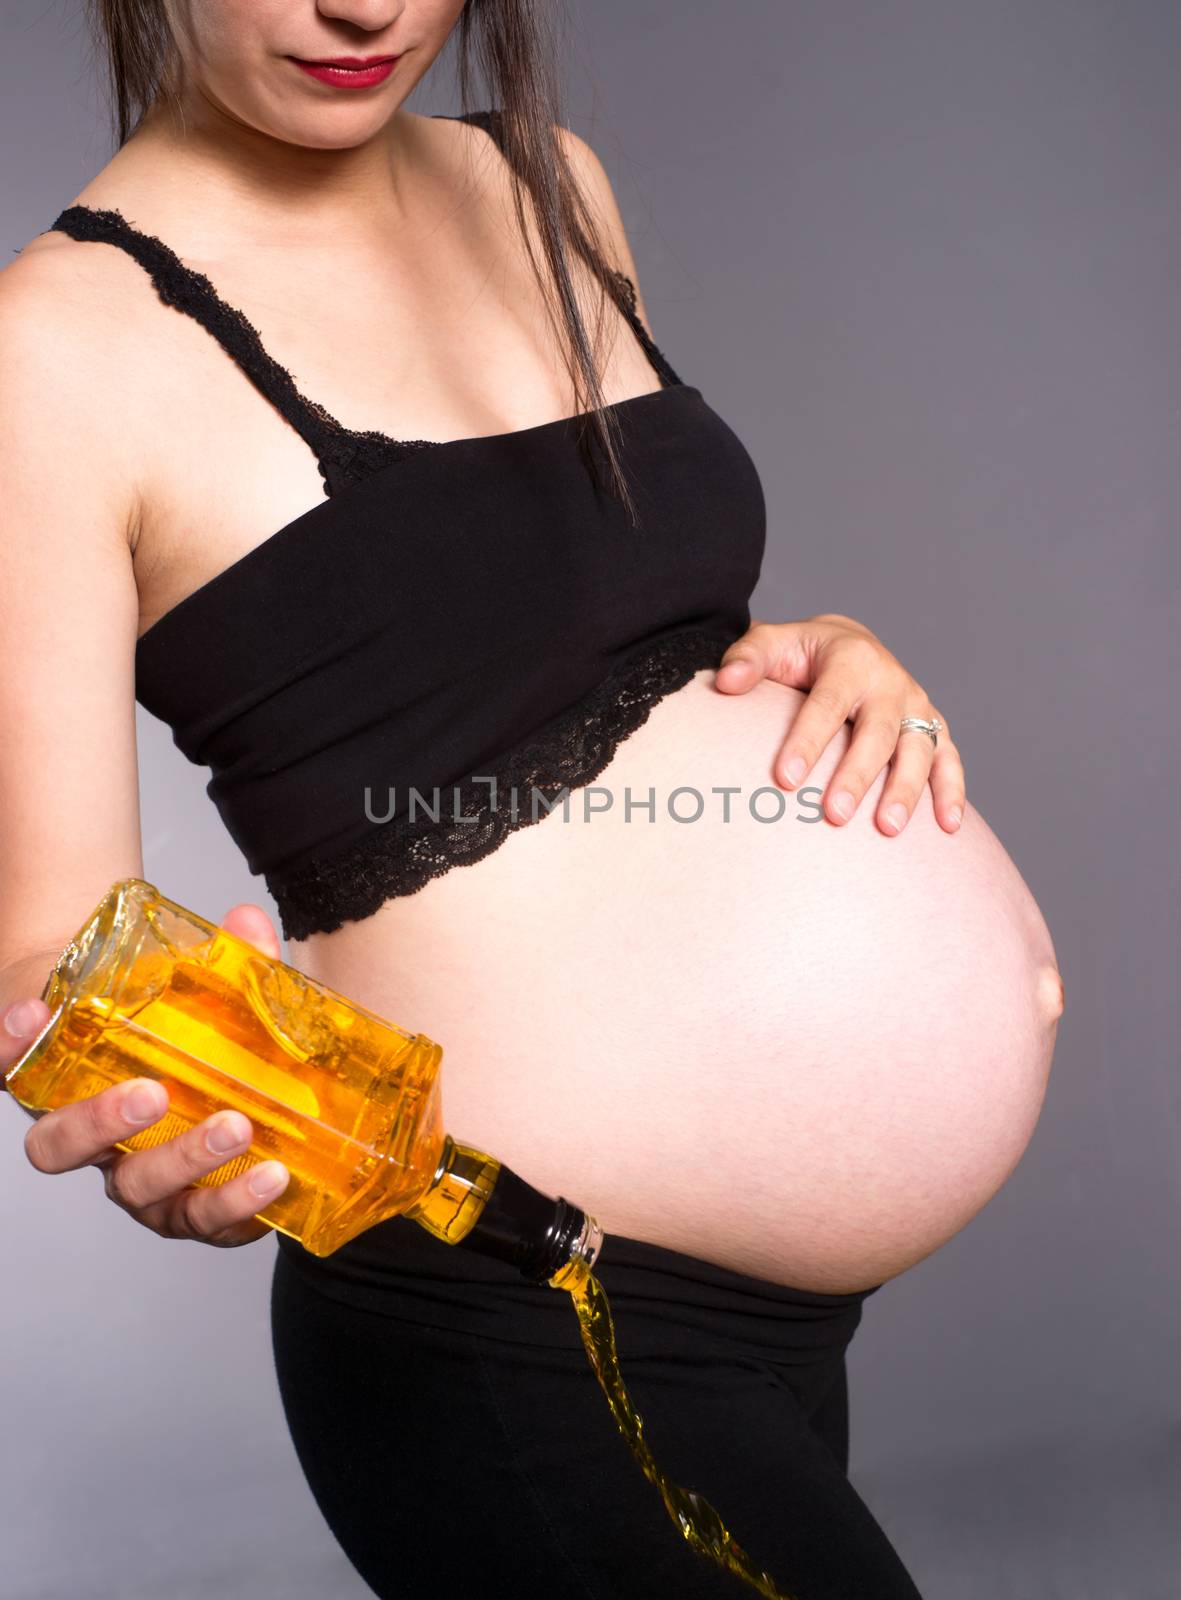 Vertical composition of woman pouring out a bottle of hard whiskey during pregnancy